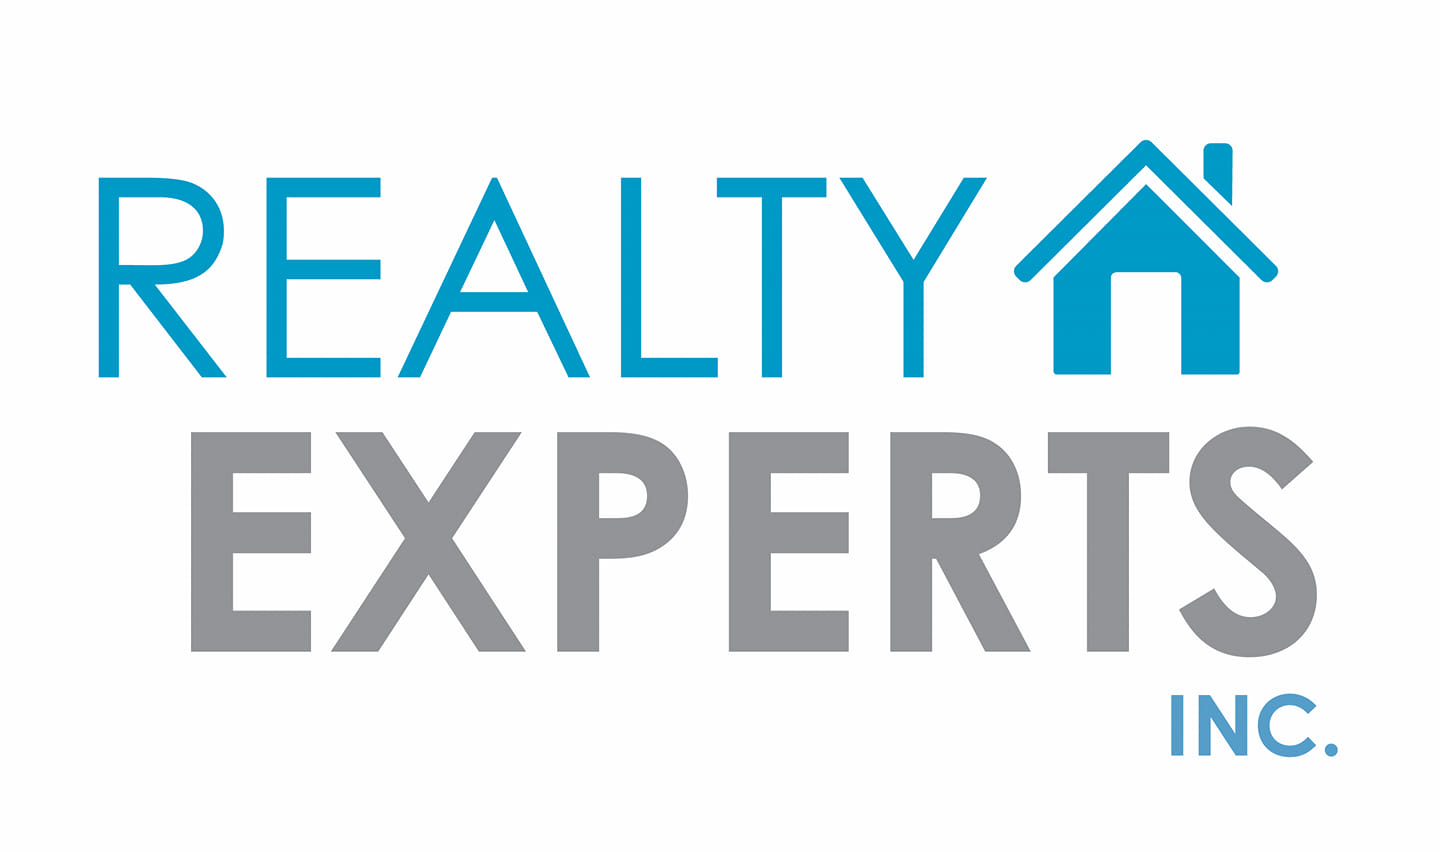 Realty Experts Inc. logo